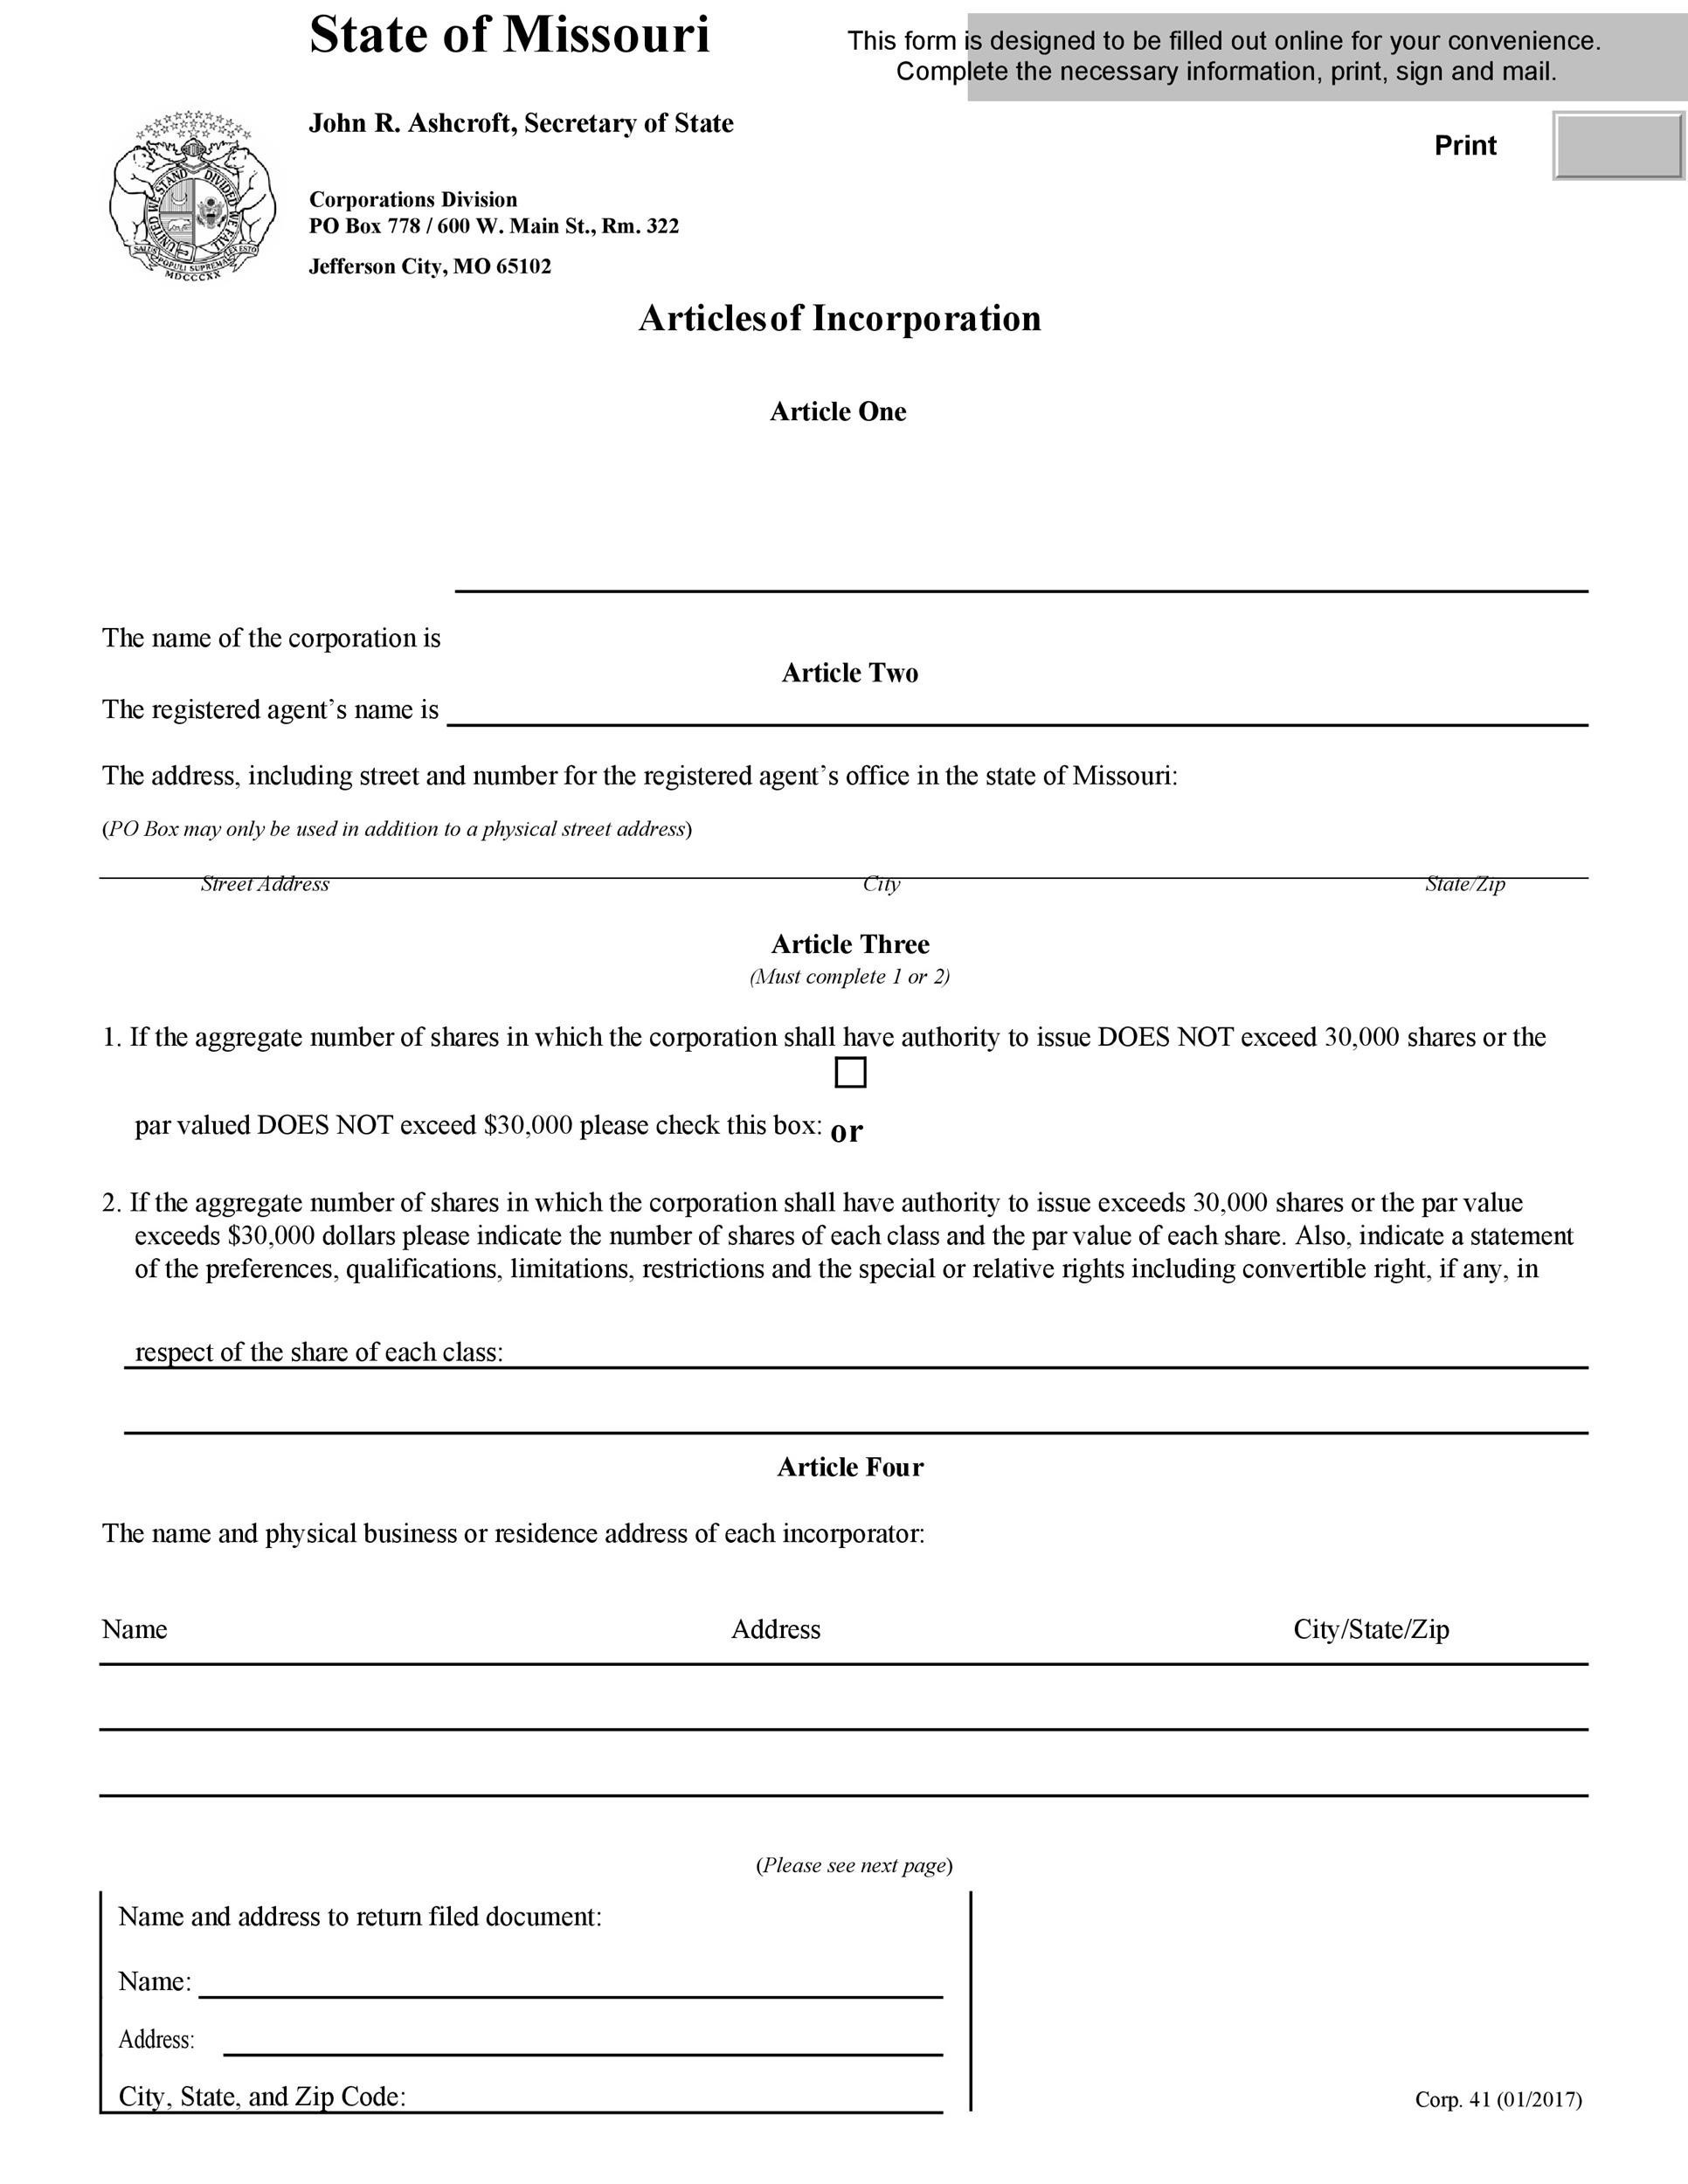 Free articles of incorporation template 24